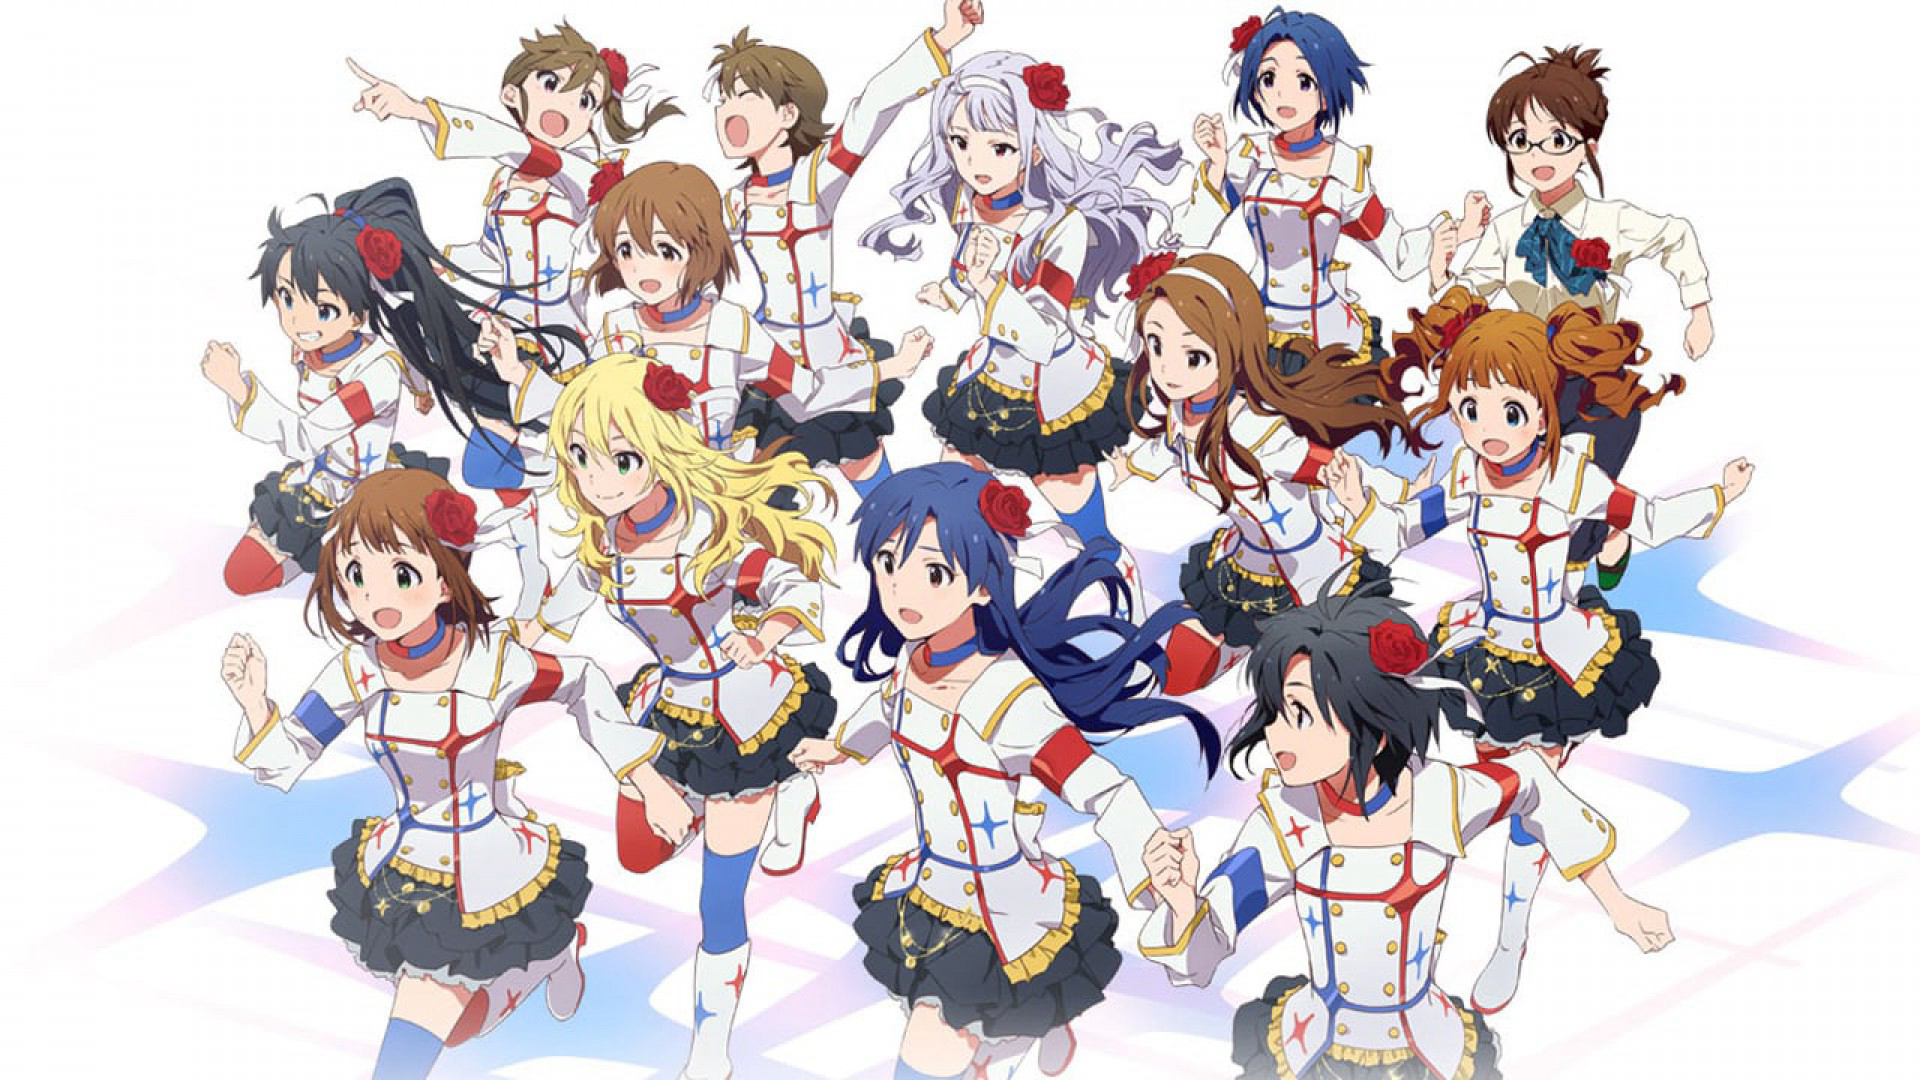 The iDOLM@STER Movie: Kagayaki no Mukougawa e! - The idol master theater version is facing the glorious shore! (2014)